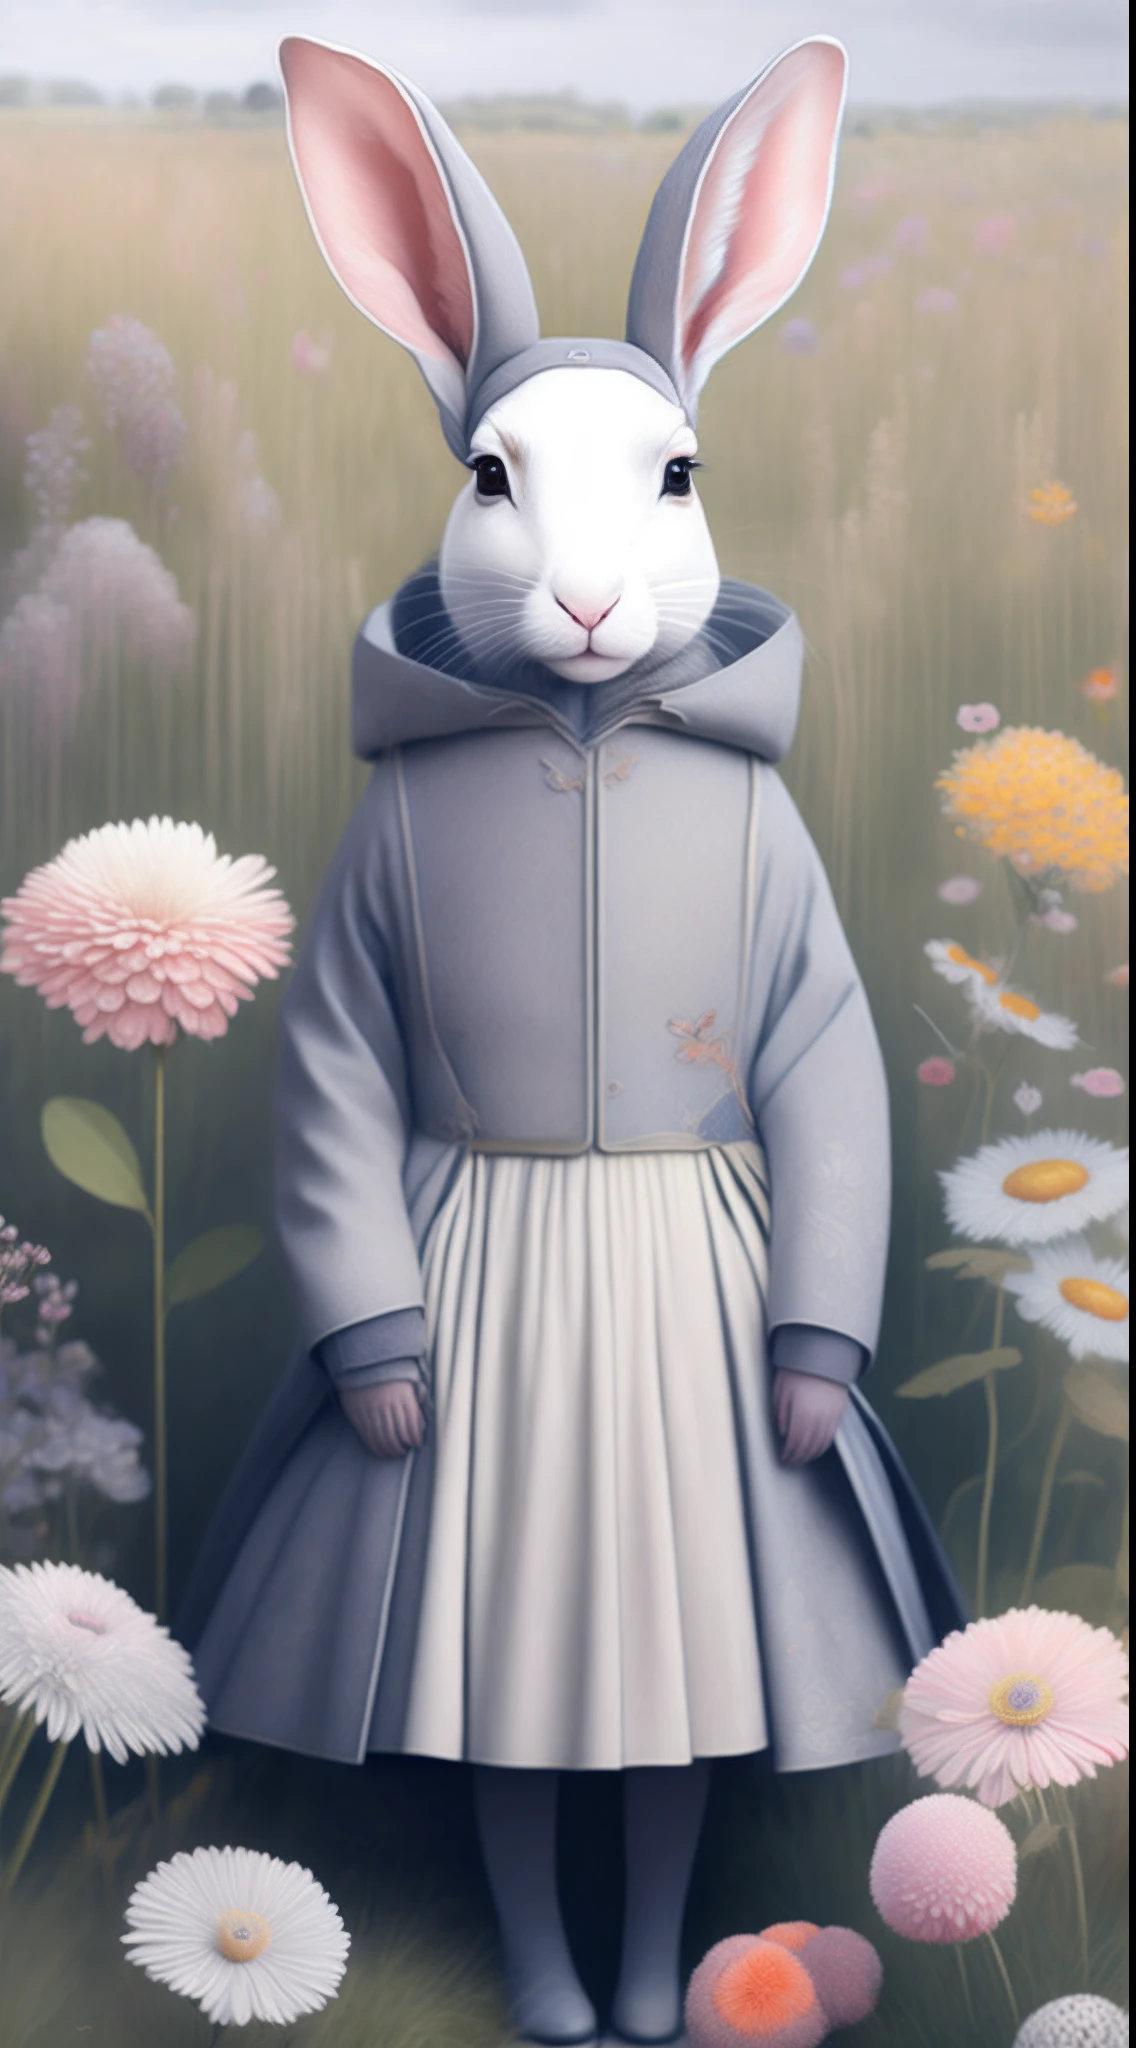 Fashionable animals : Several animals side by side : un lapin (en costume gris). In a field of flowers in the manner of Miho Hirano